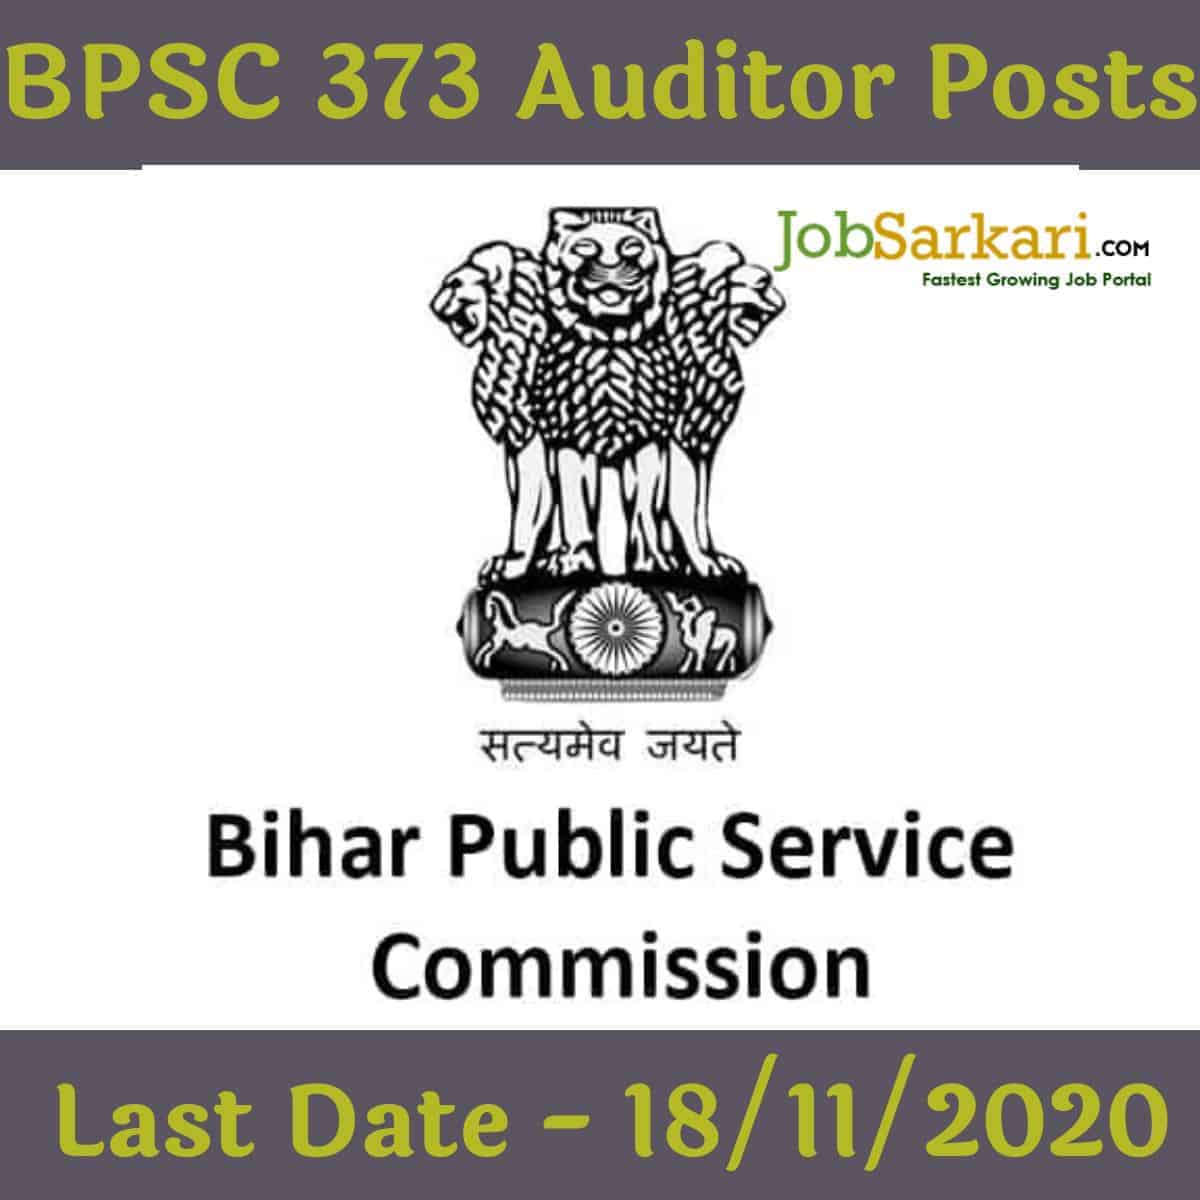 BPSC 373 Auditor Posts 1